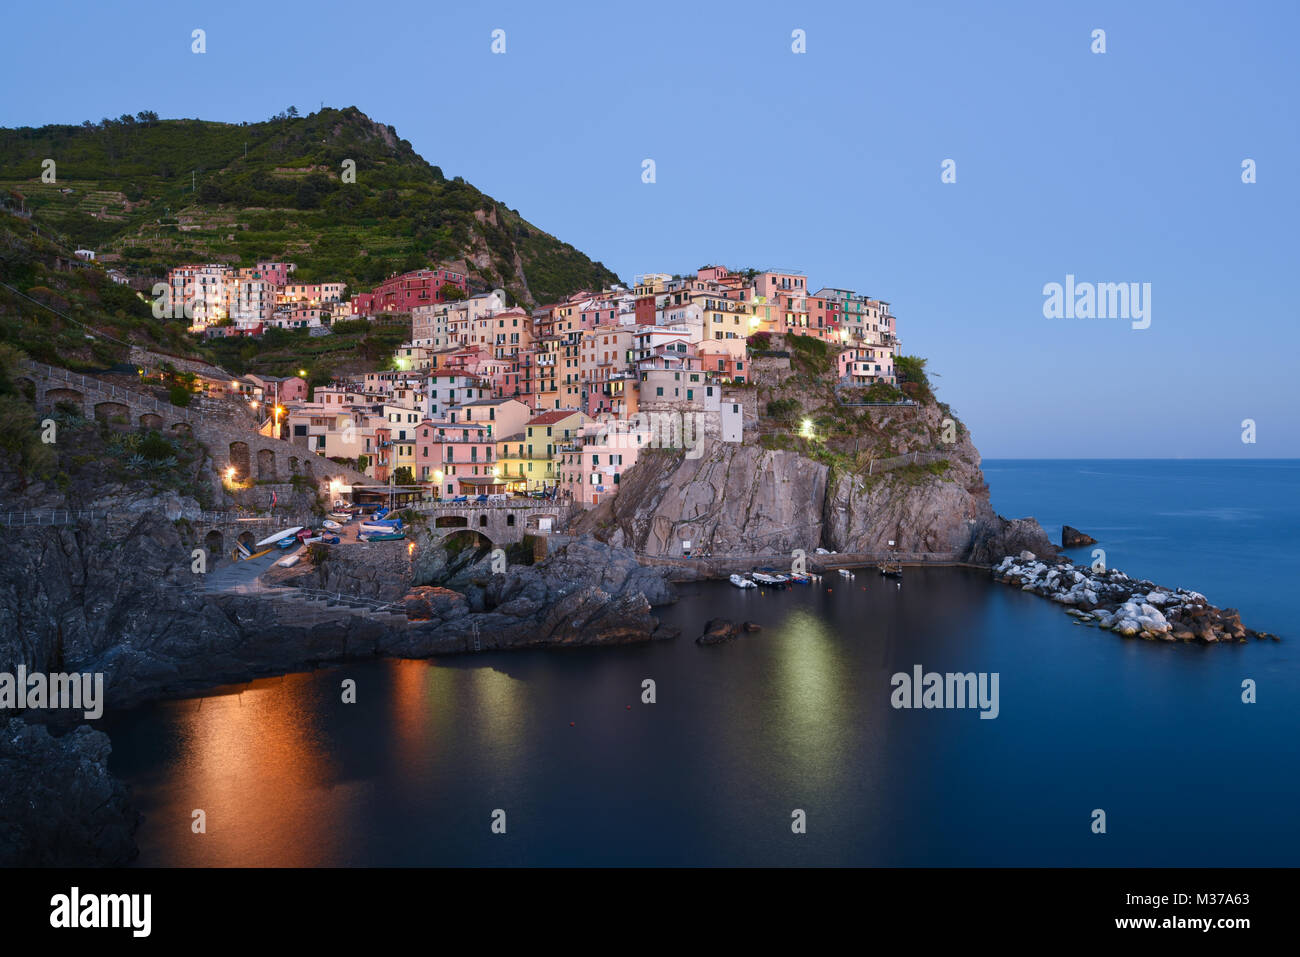 Long exposure of beautiful town of Manarola on the Cinque Terre on Italian coastline after sunset late afternoon on a clear day before blue hour Stock Photo